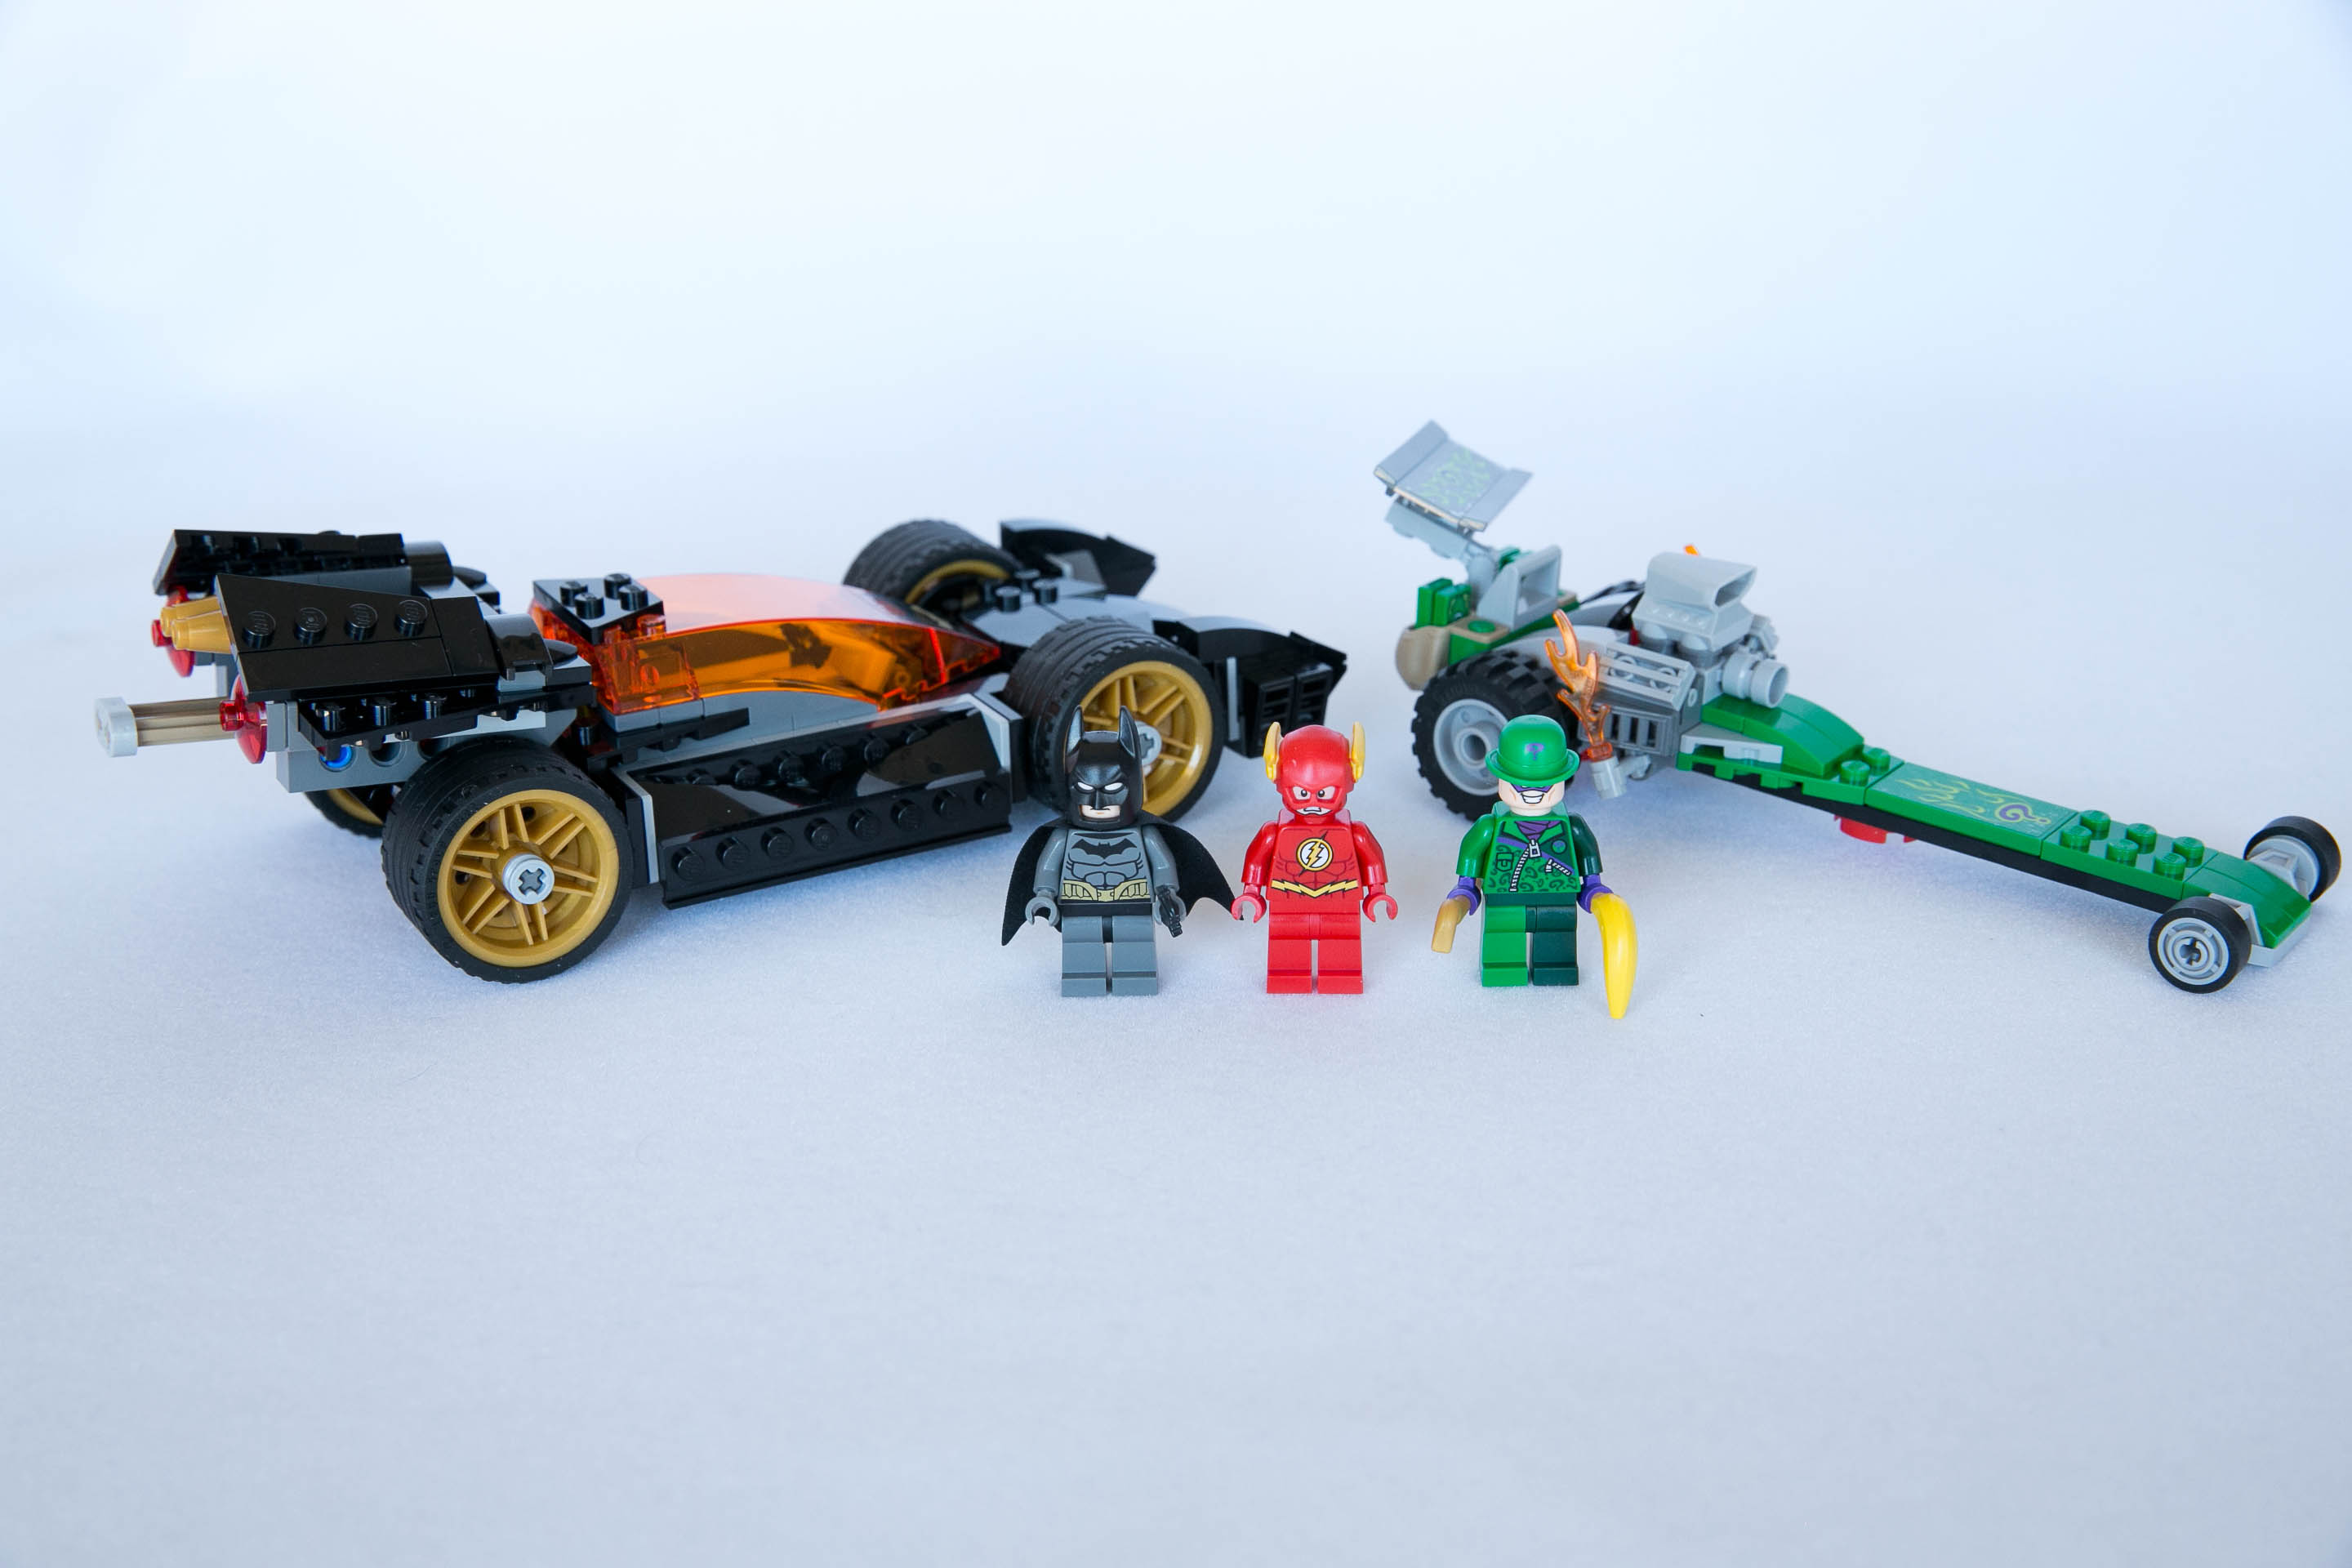 Genuine Lego DC BATMAN Batmobile (vehicle) build only from 76012